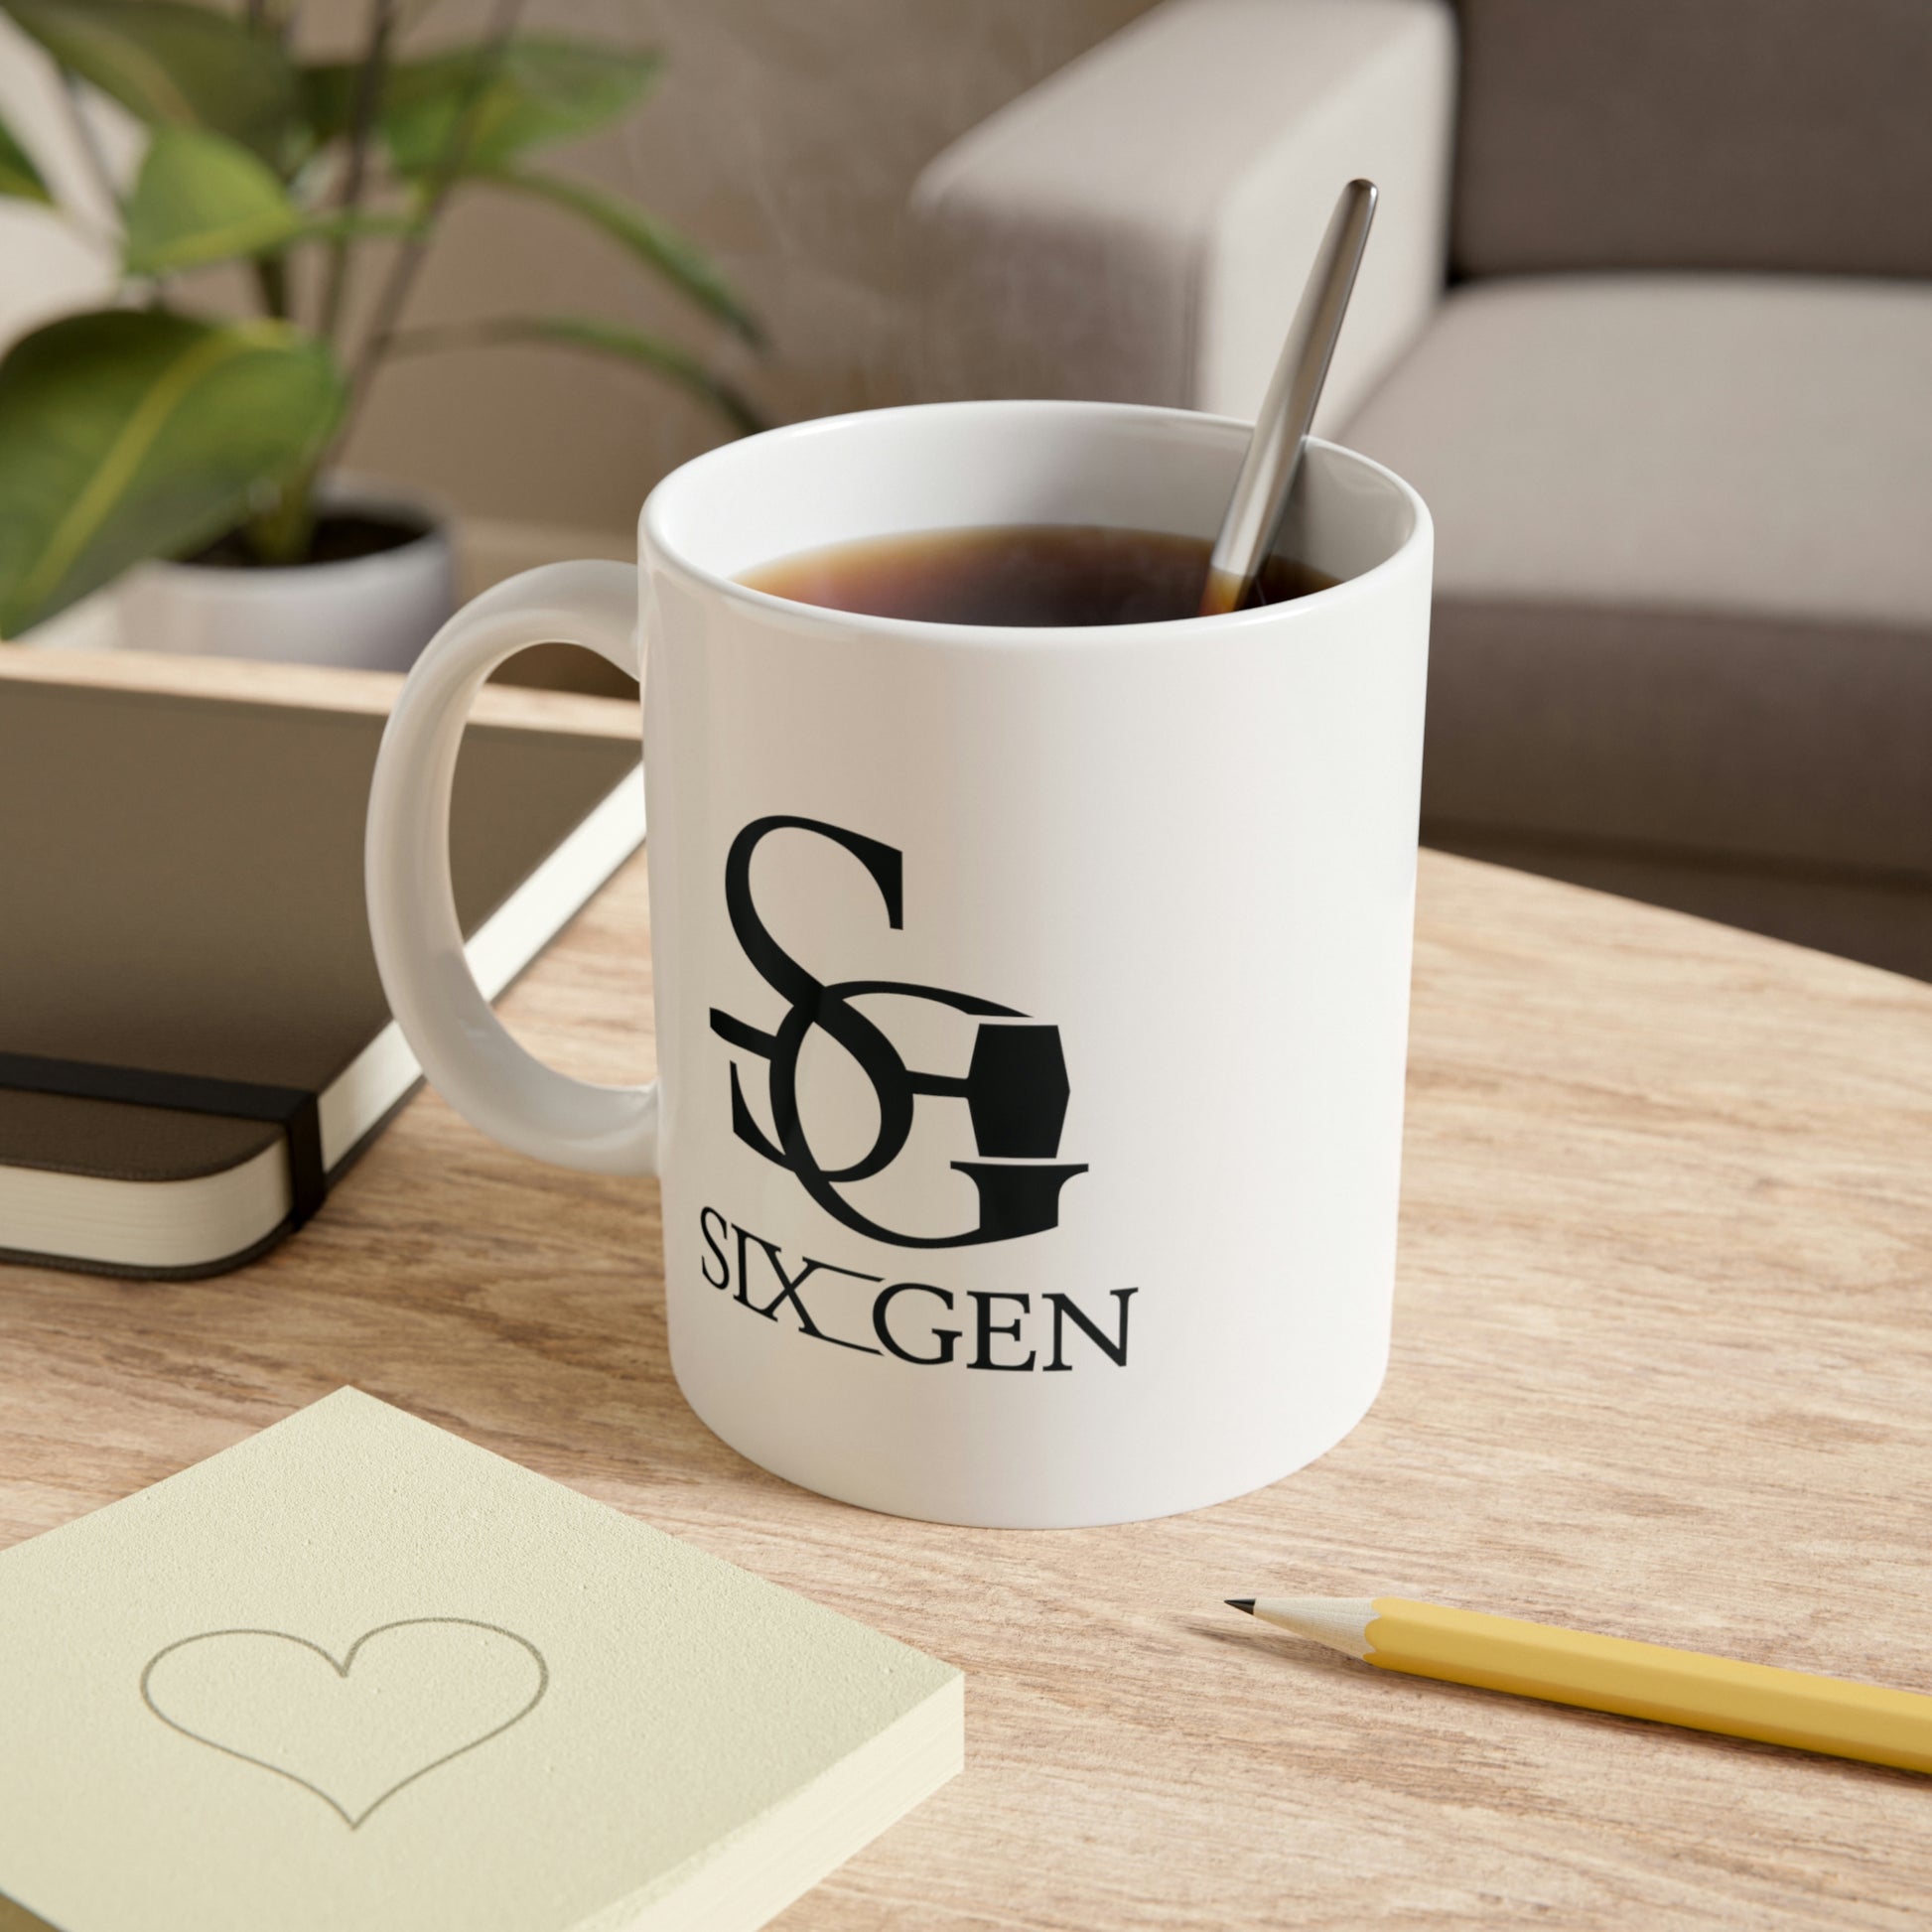 Coffee Cup with Six-Gen Logo